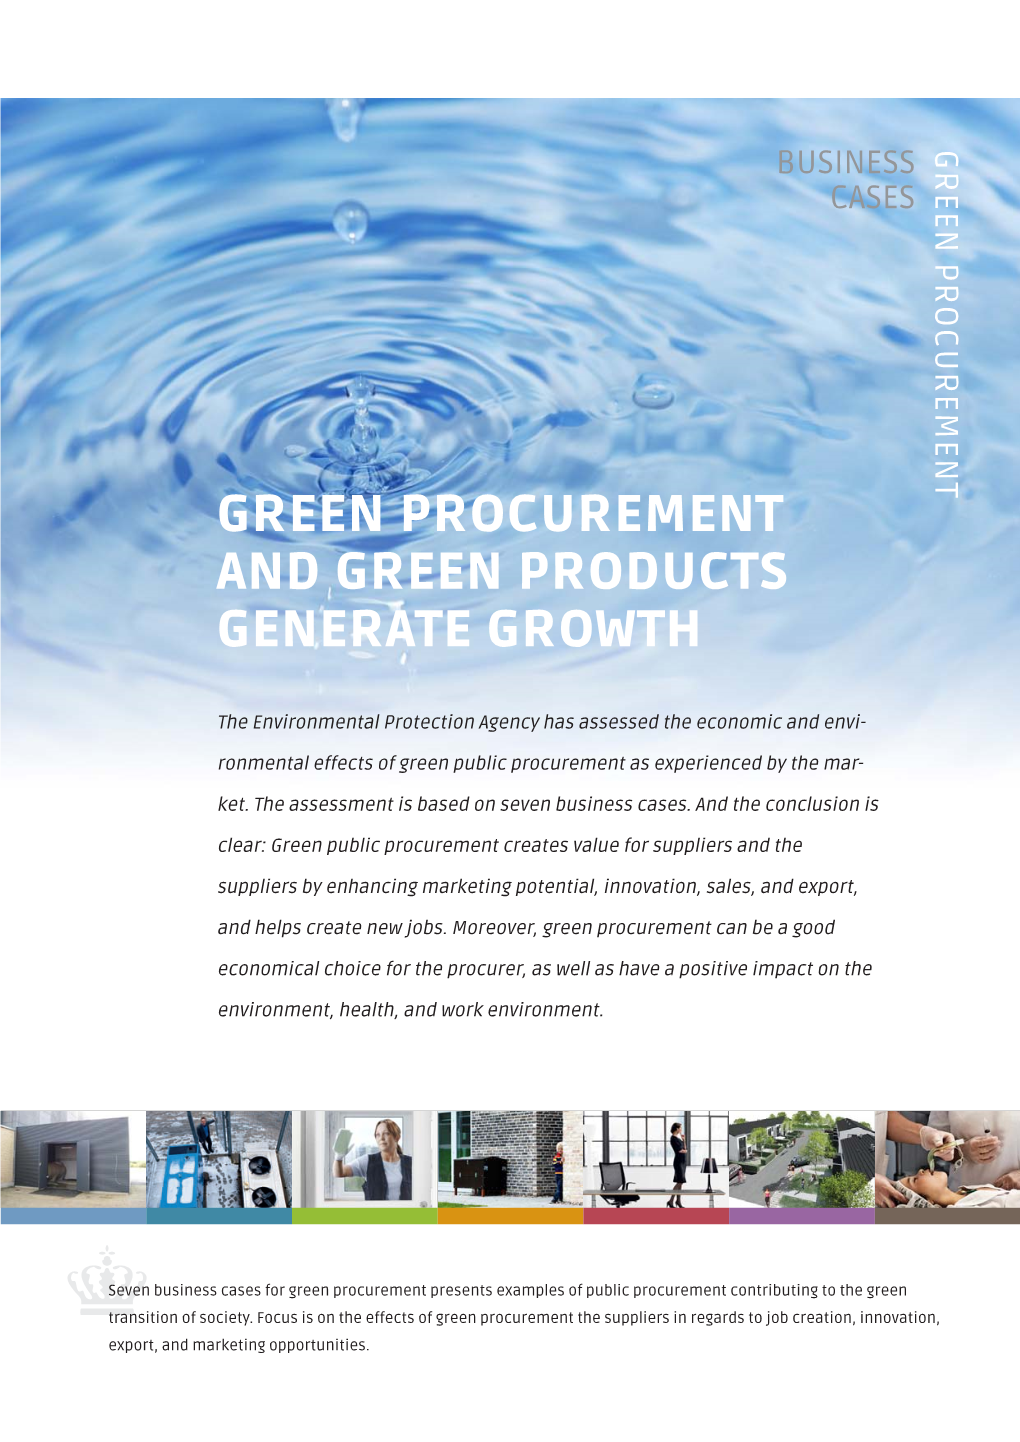 Green Procurement and Green Products Generate Growth